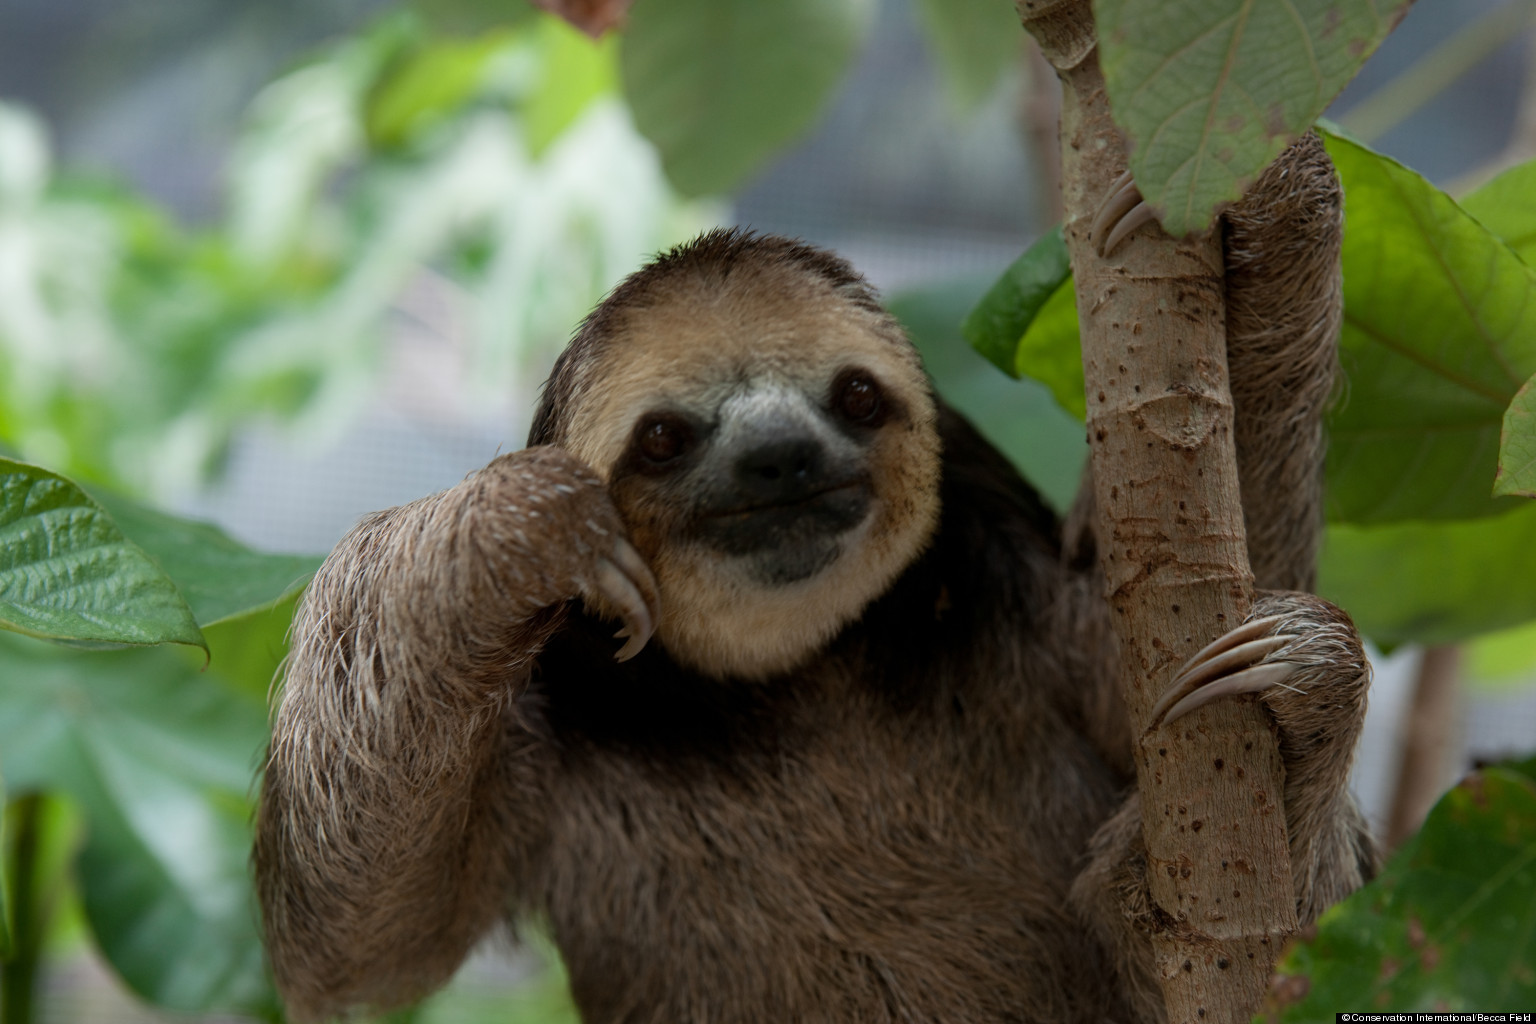 Photos Of Sloths Document Monique Pool Rescuing Animals After Suriname